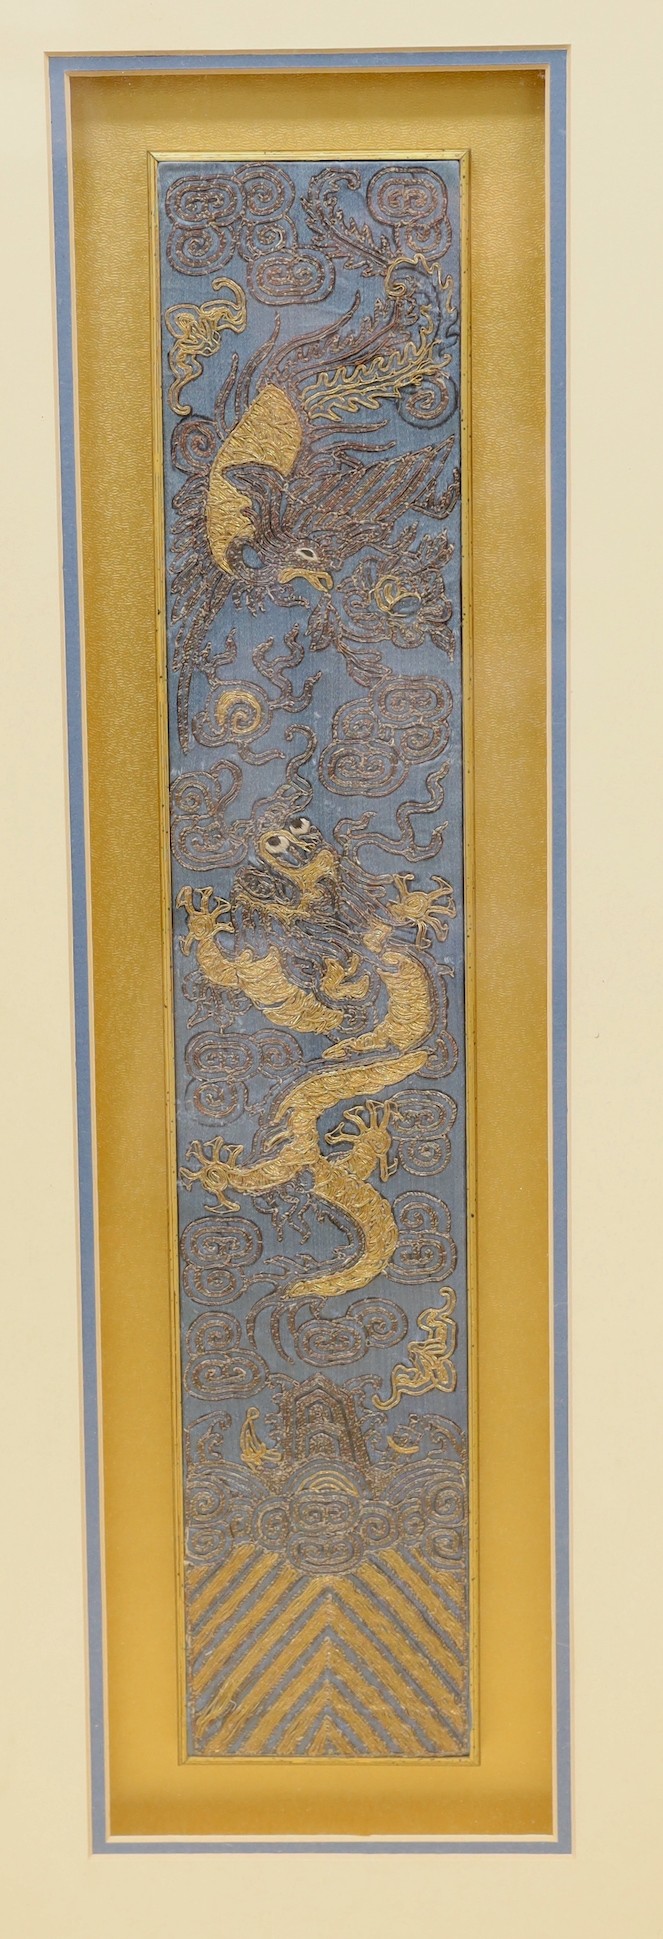 A pair of framed early 20th century Chinese metal thread embroidered ‘dragon’ design sleeve bands, - Image 2 of 4